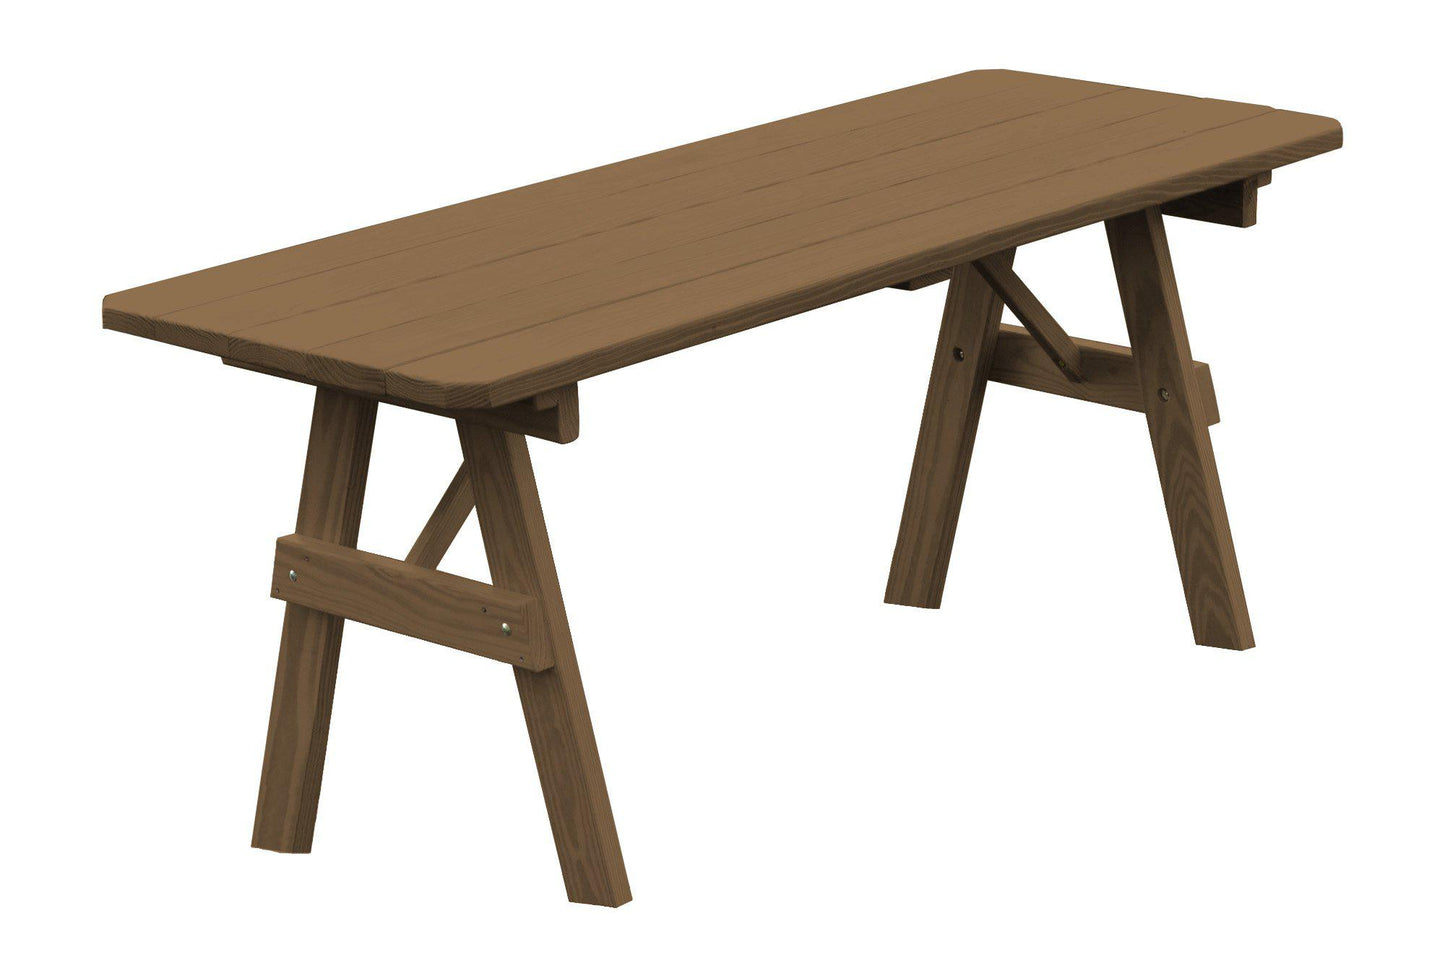 A&L Furniture Co. Yellow Pine 5' Traditional Table Only - Specify for Umbrella Hole - LEAD TIME TO SHIP 10 BUSINESS DAYS